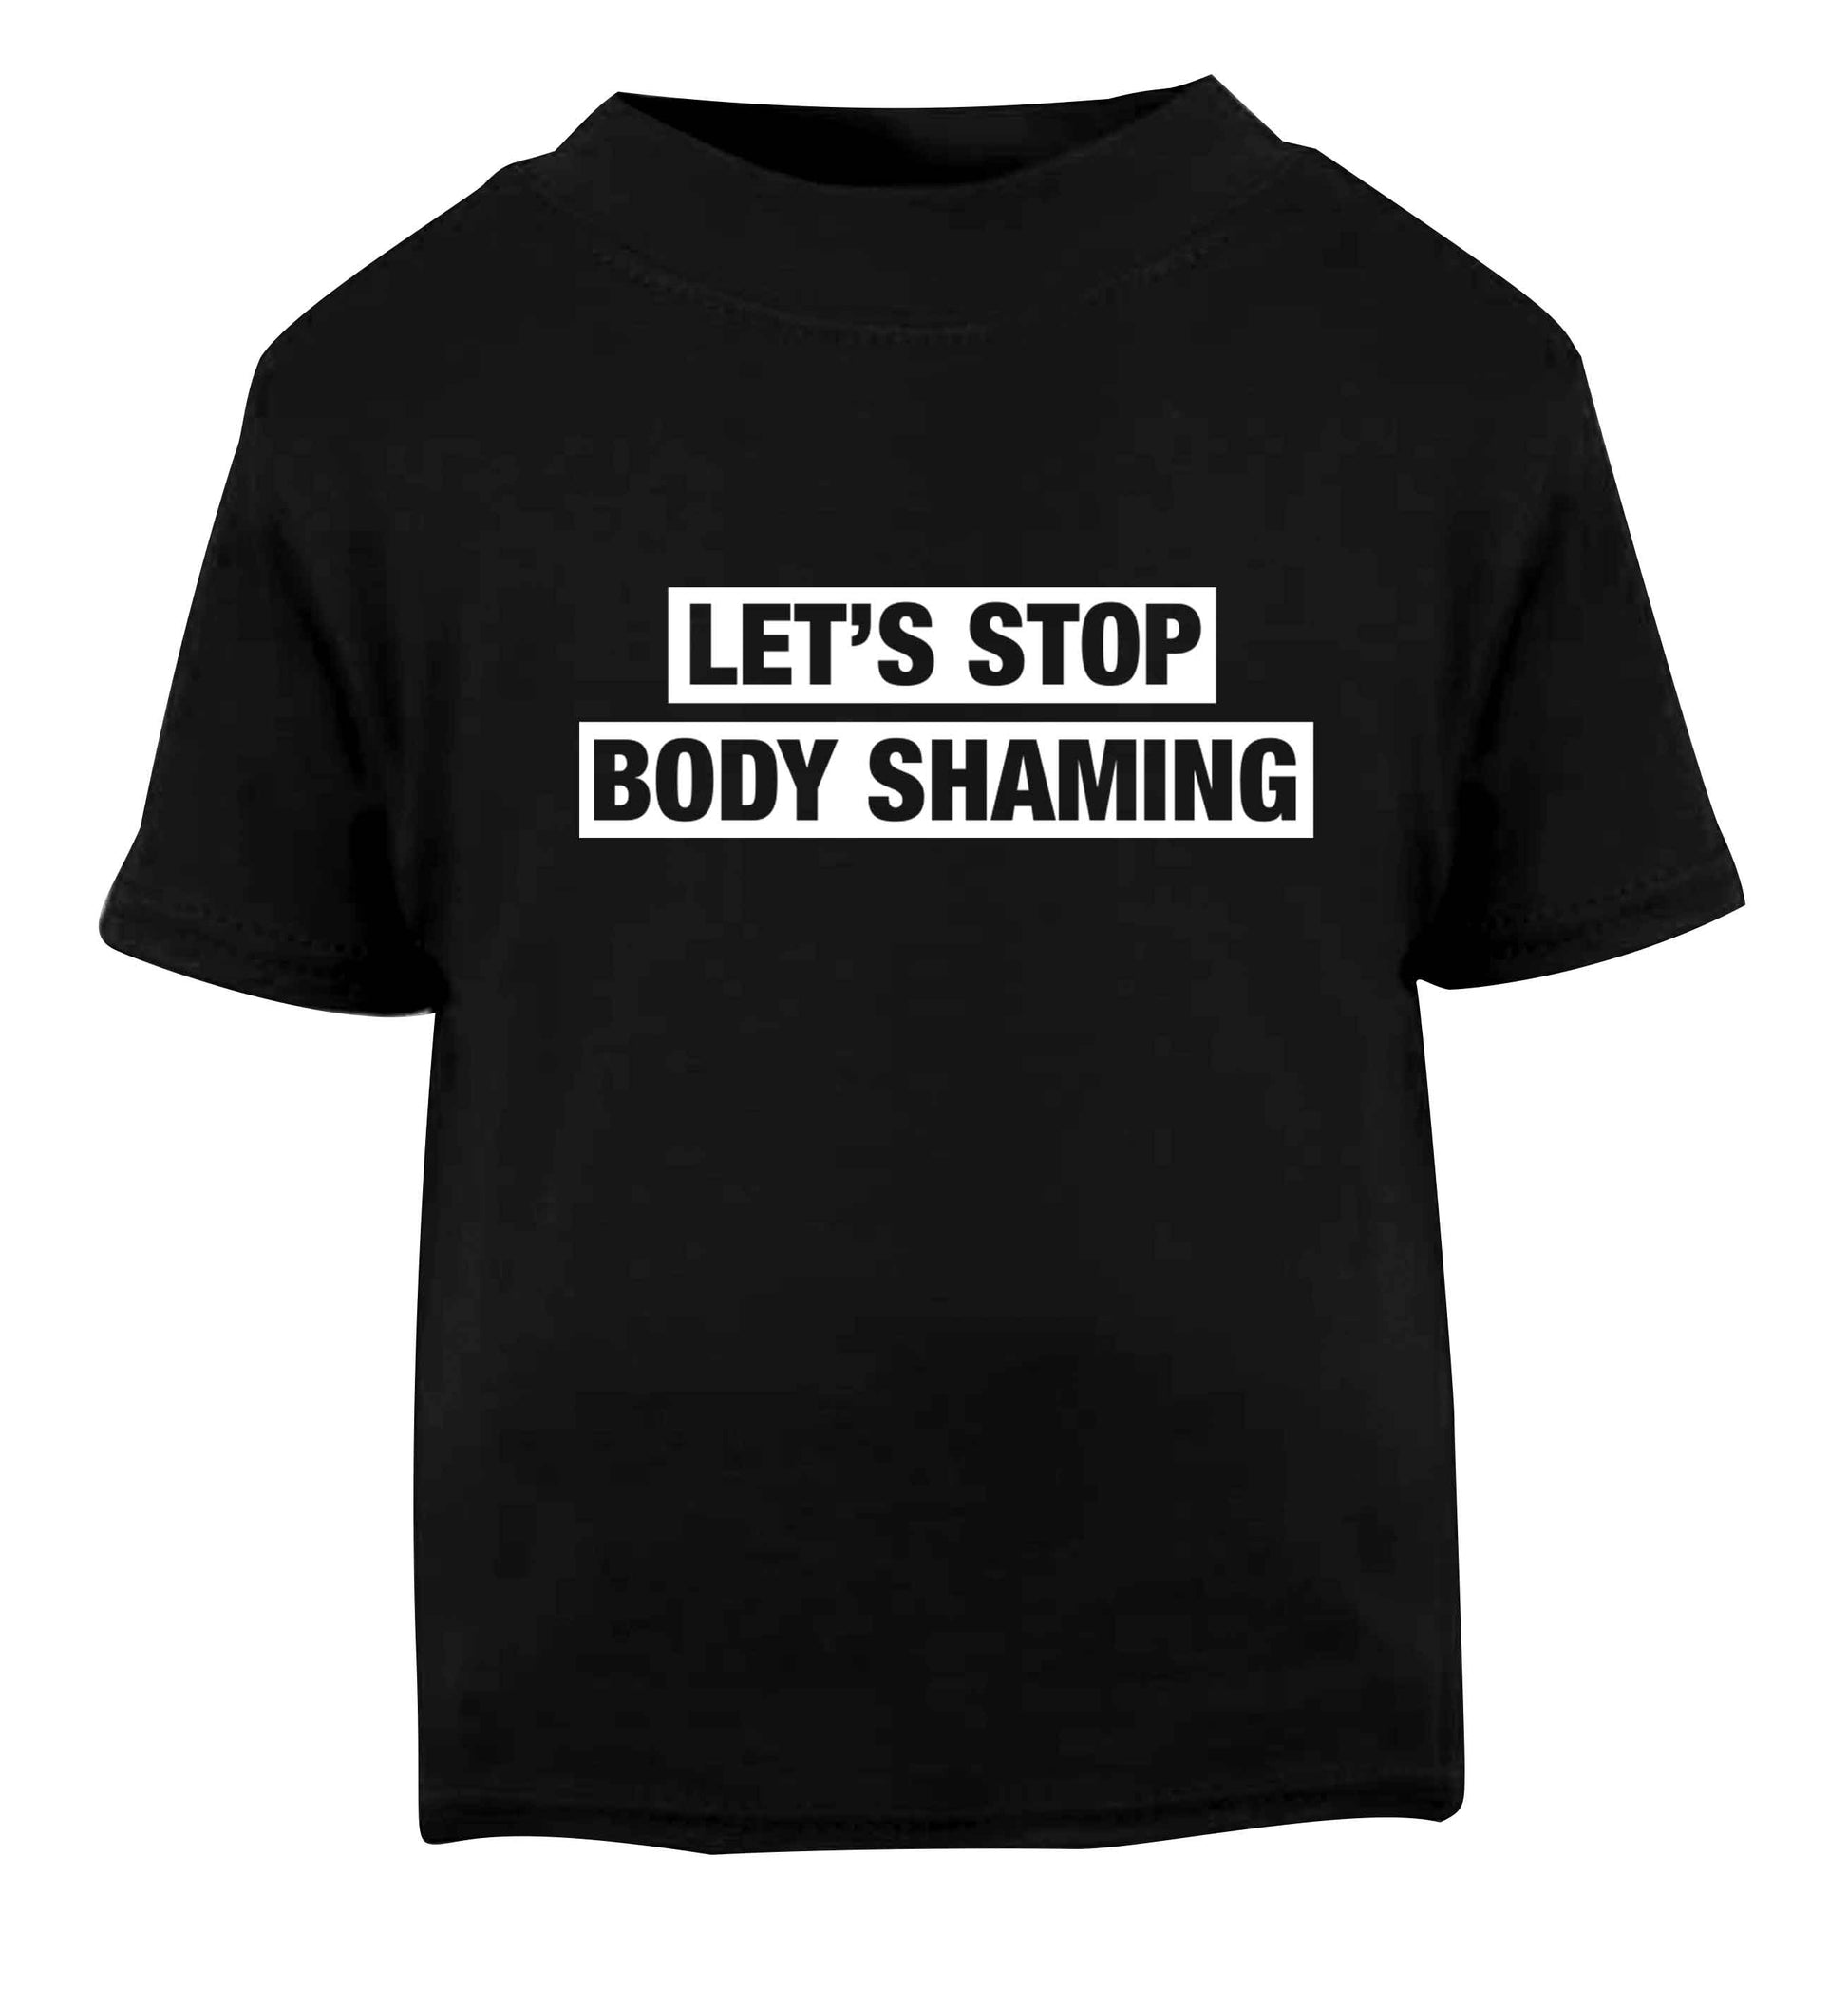 Let's stop body shaming Black baby toddler Tshirt 2 years